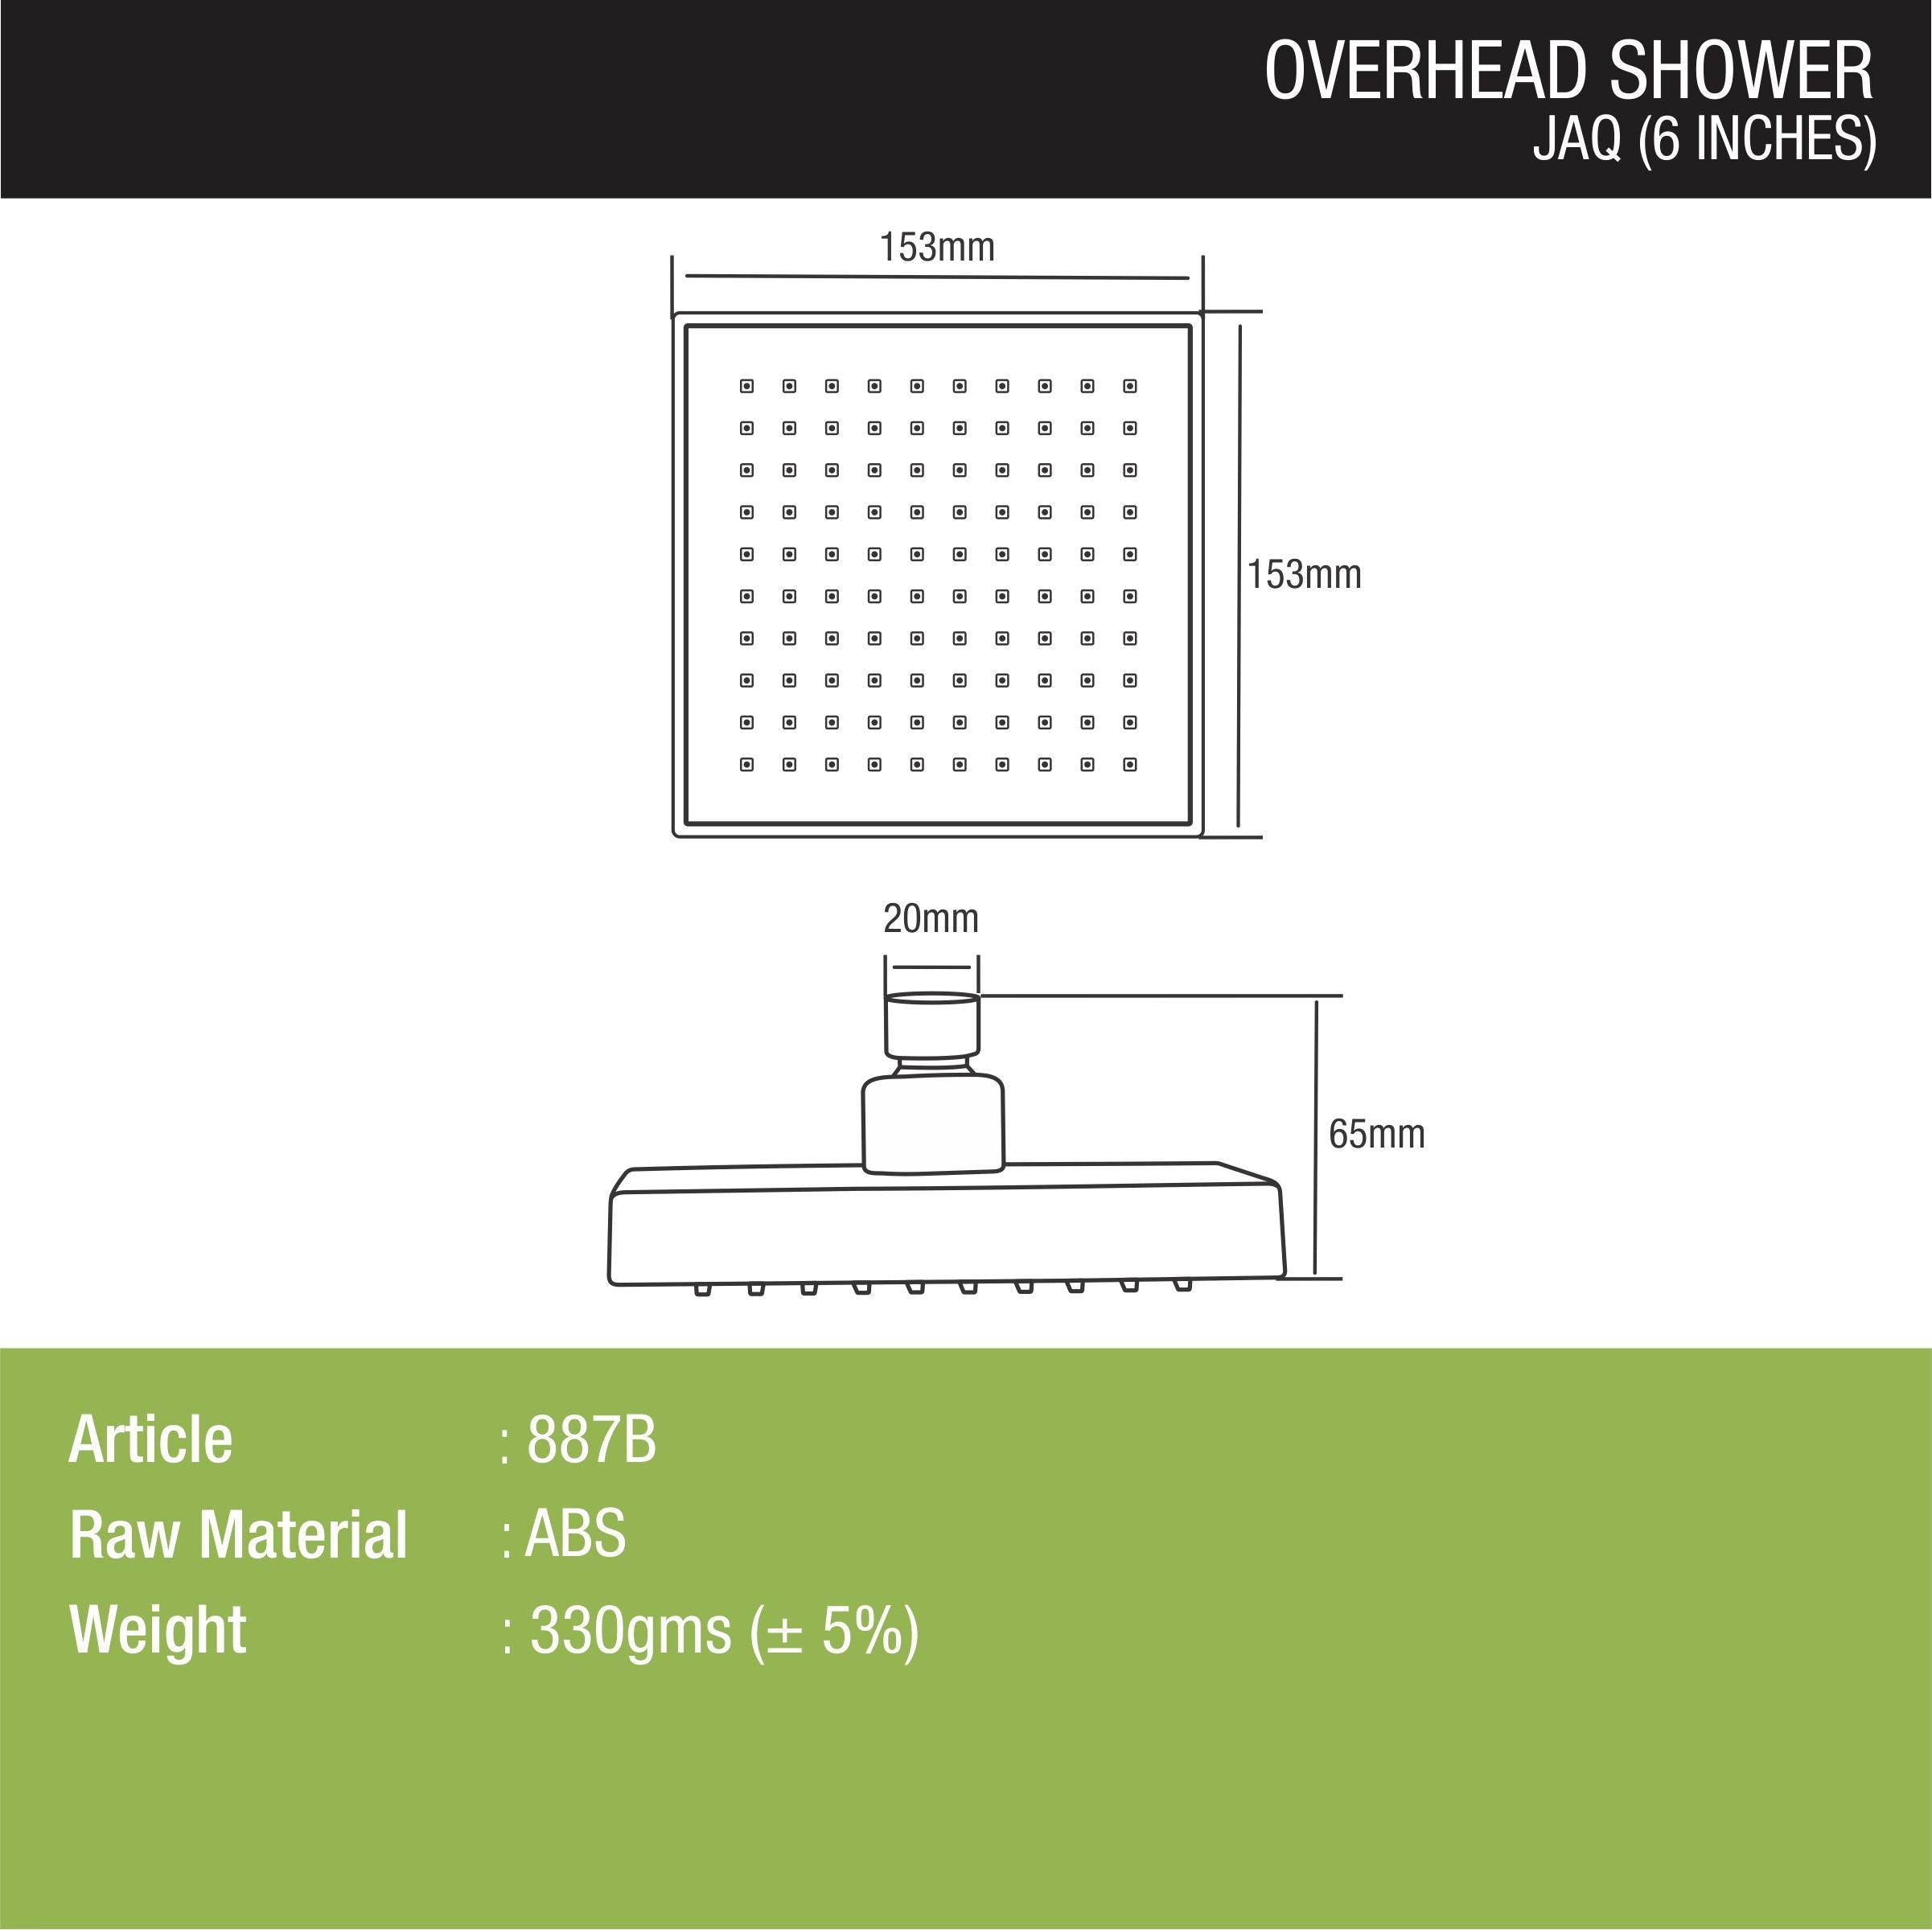 Jaq Overhead Shower (6 x 6 Inches) dimensions and sizes